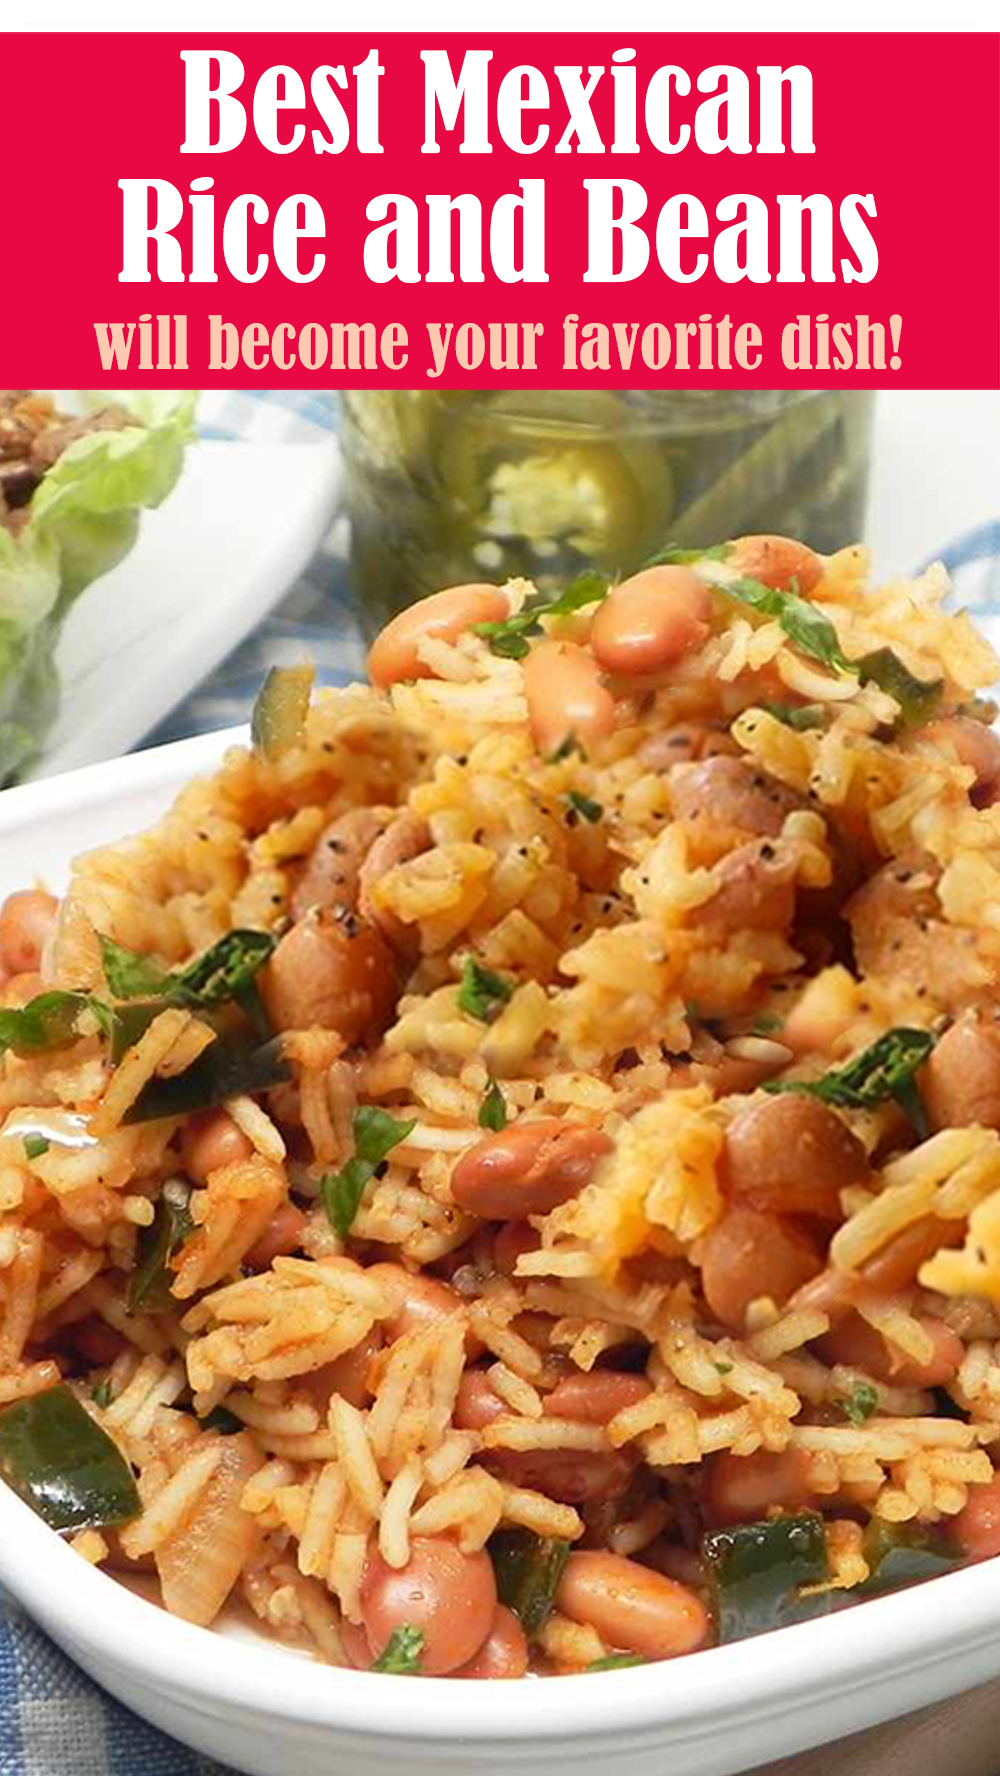 Best Mexican Rice and Beans Recipe